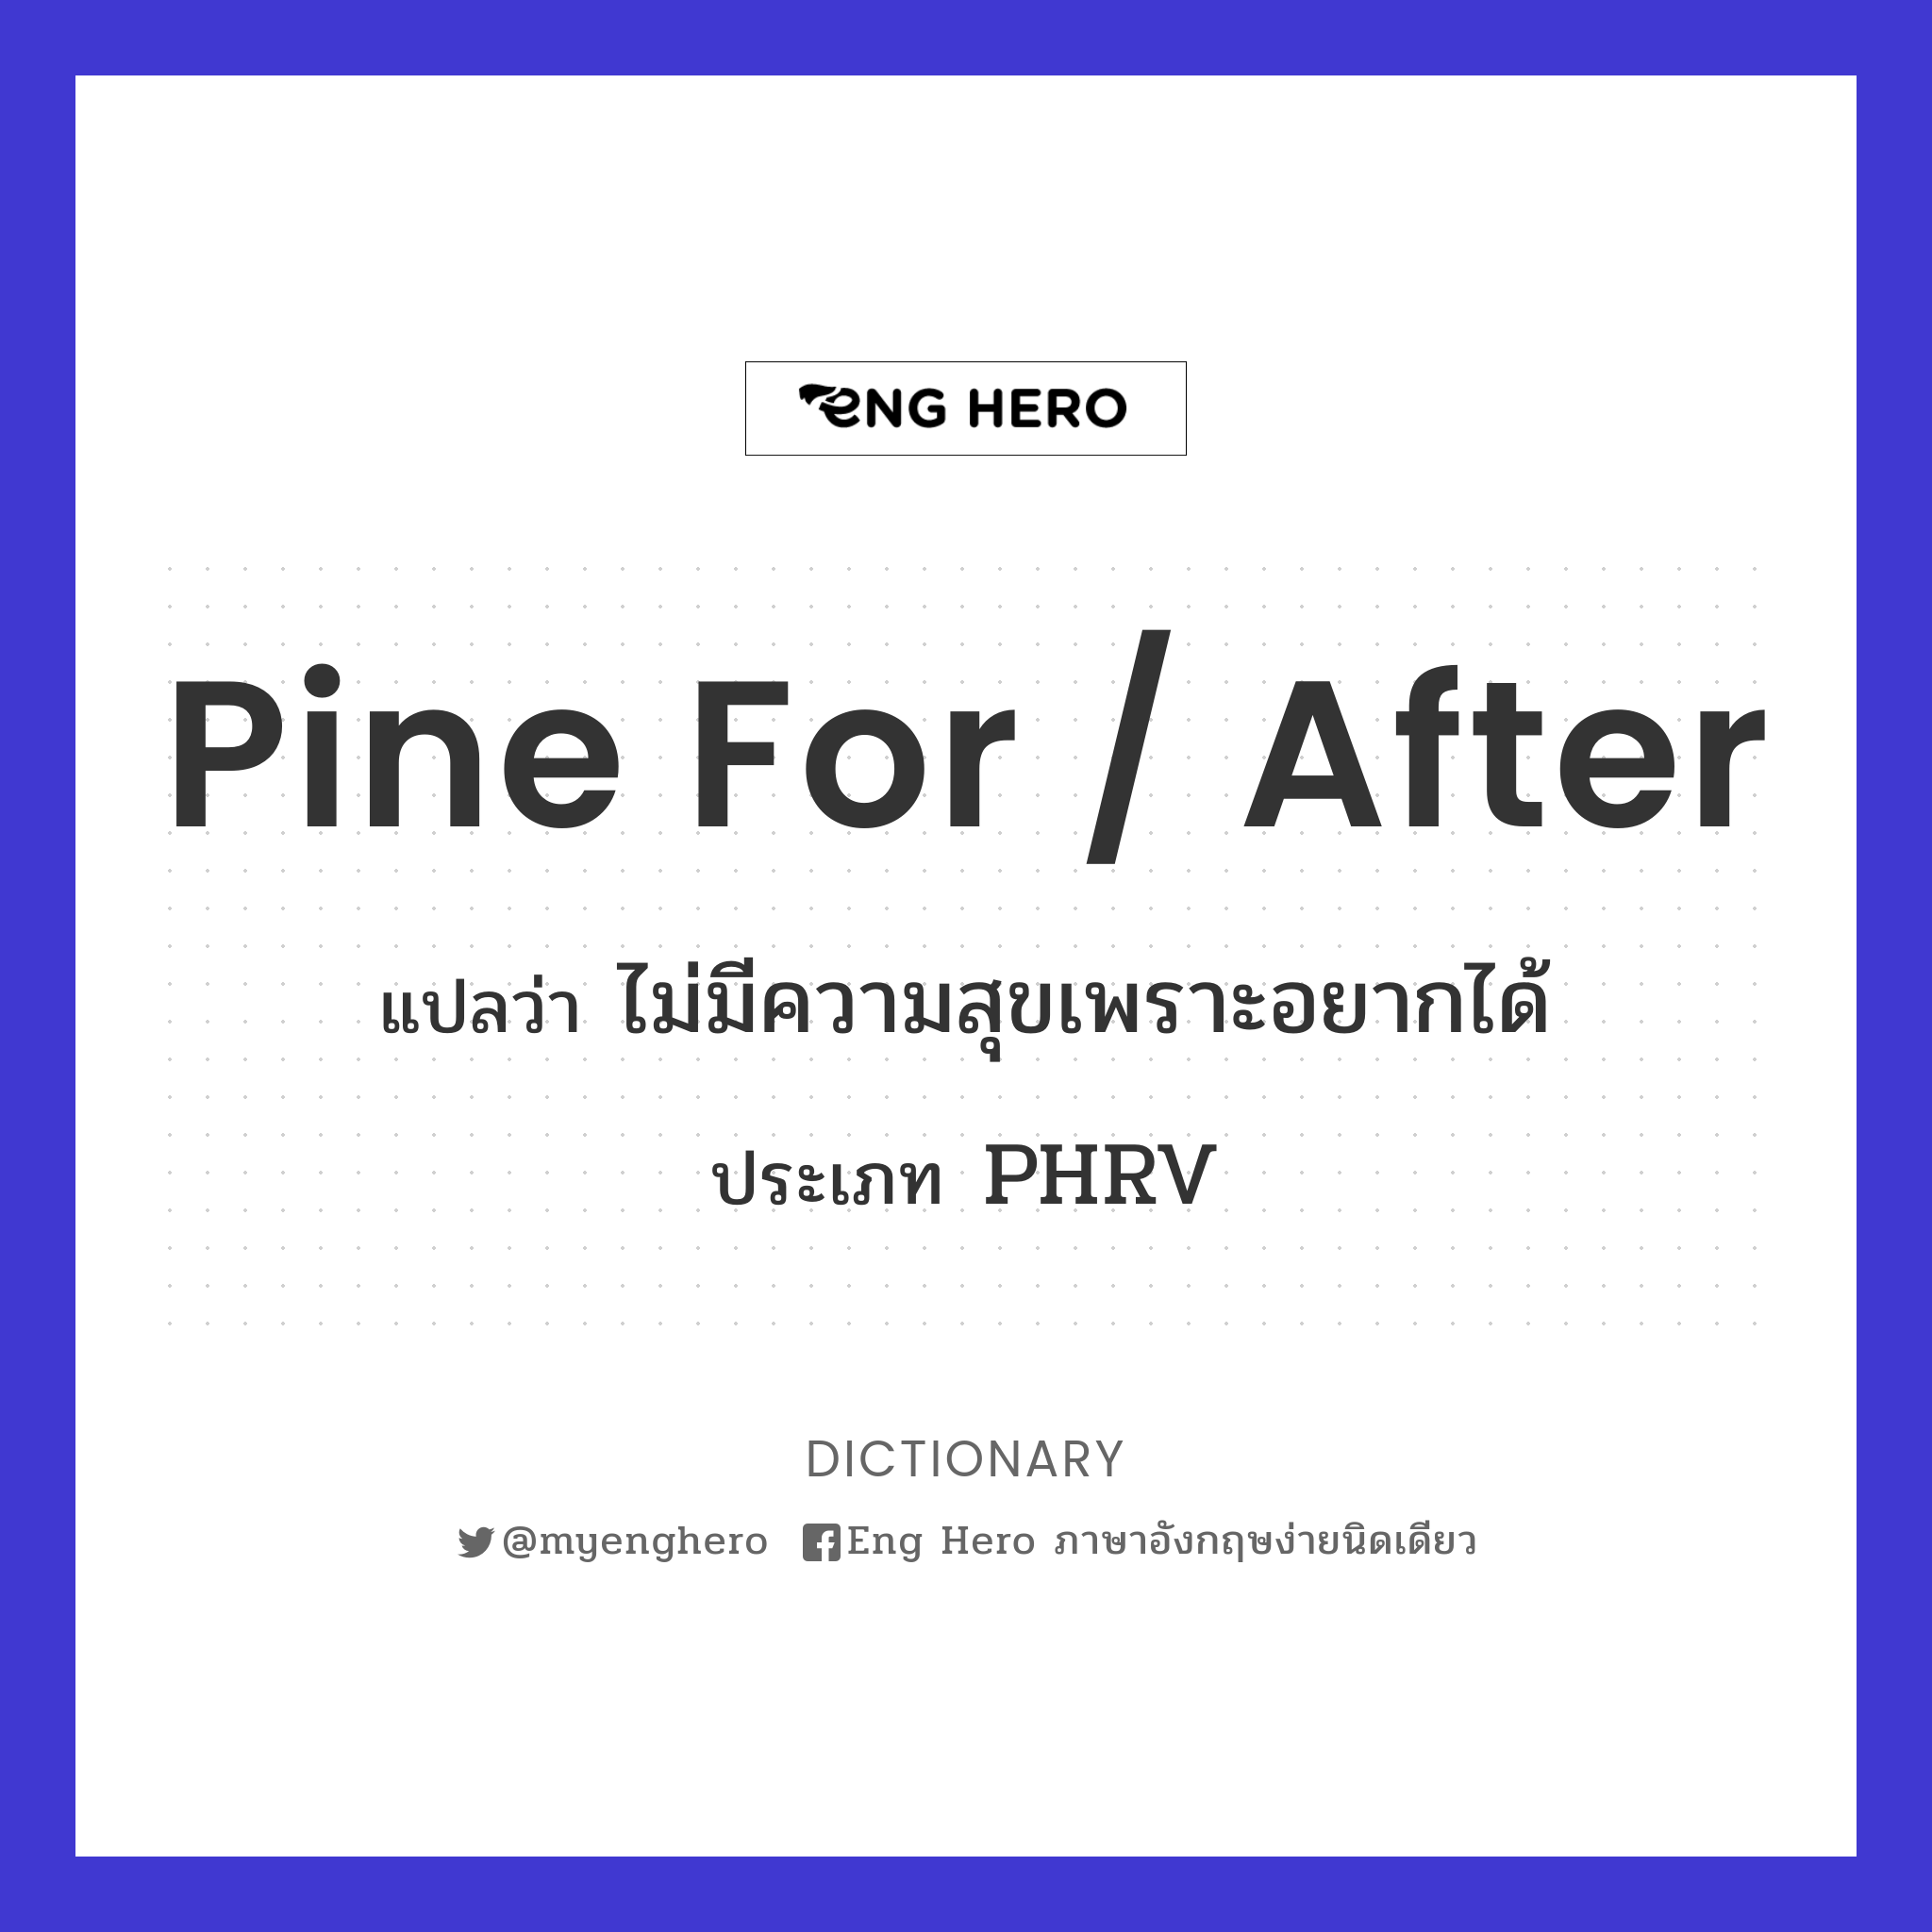 pine for / after